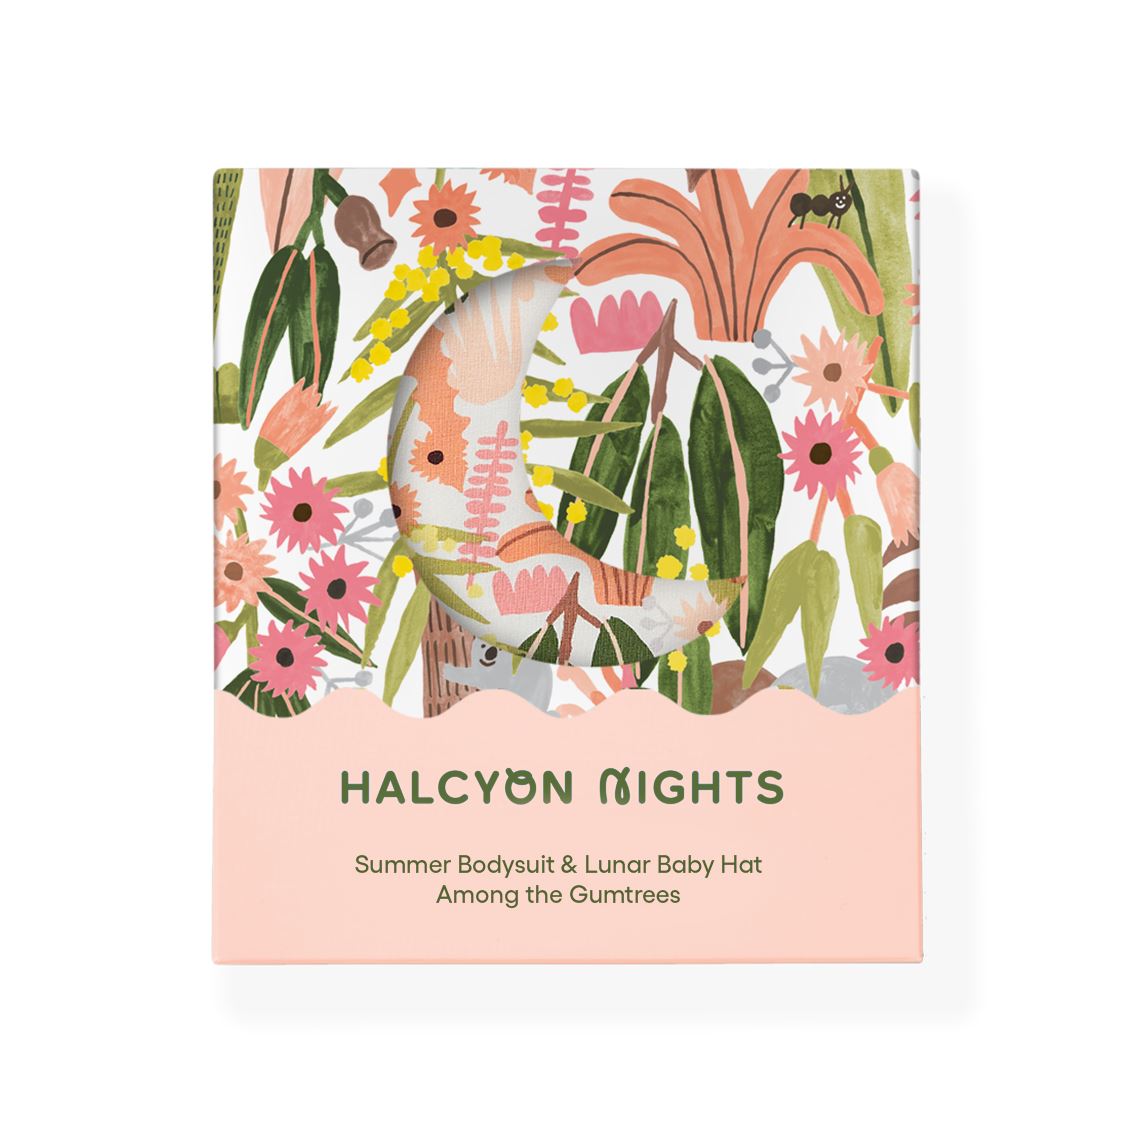 Australia-wide gift delivery | Halcyon Nights Summer Bodysuit | Baby gifts delivered Australia